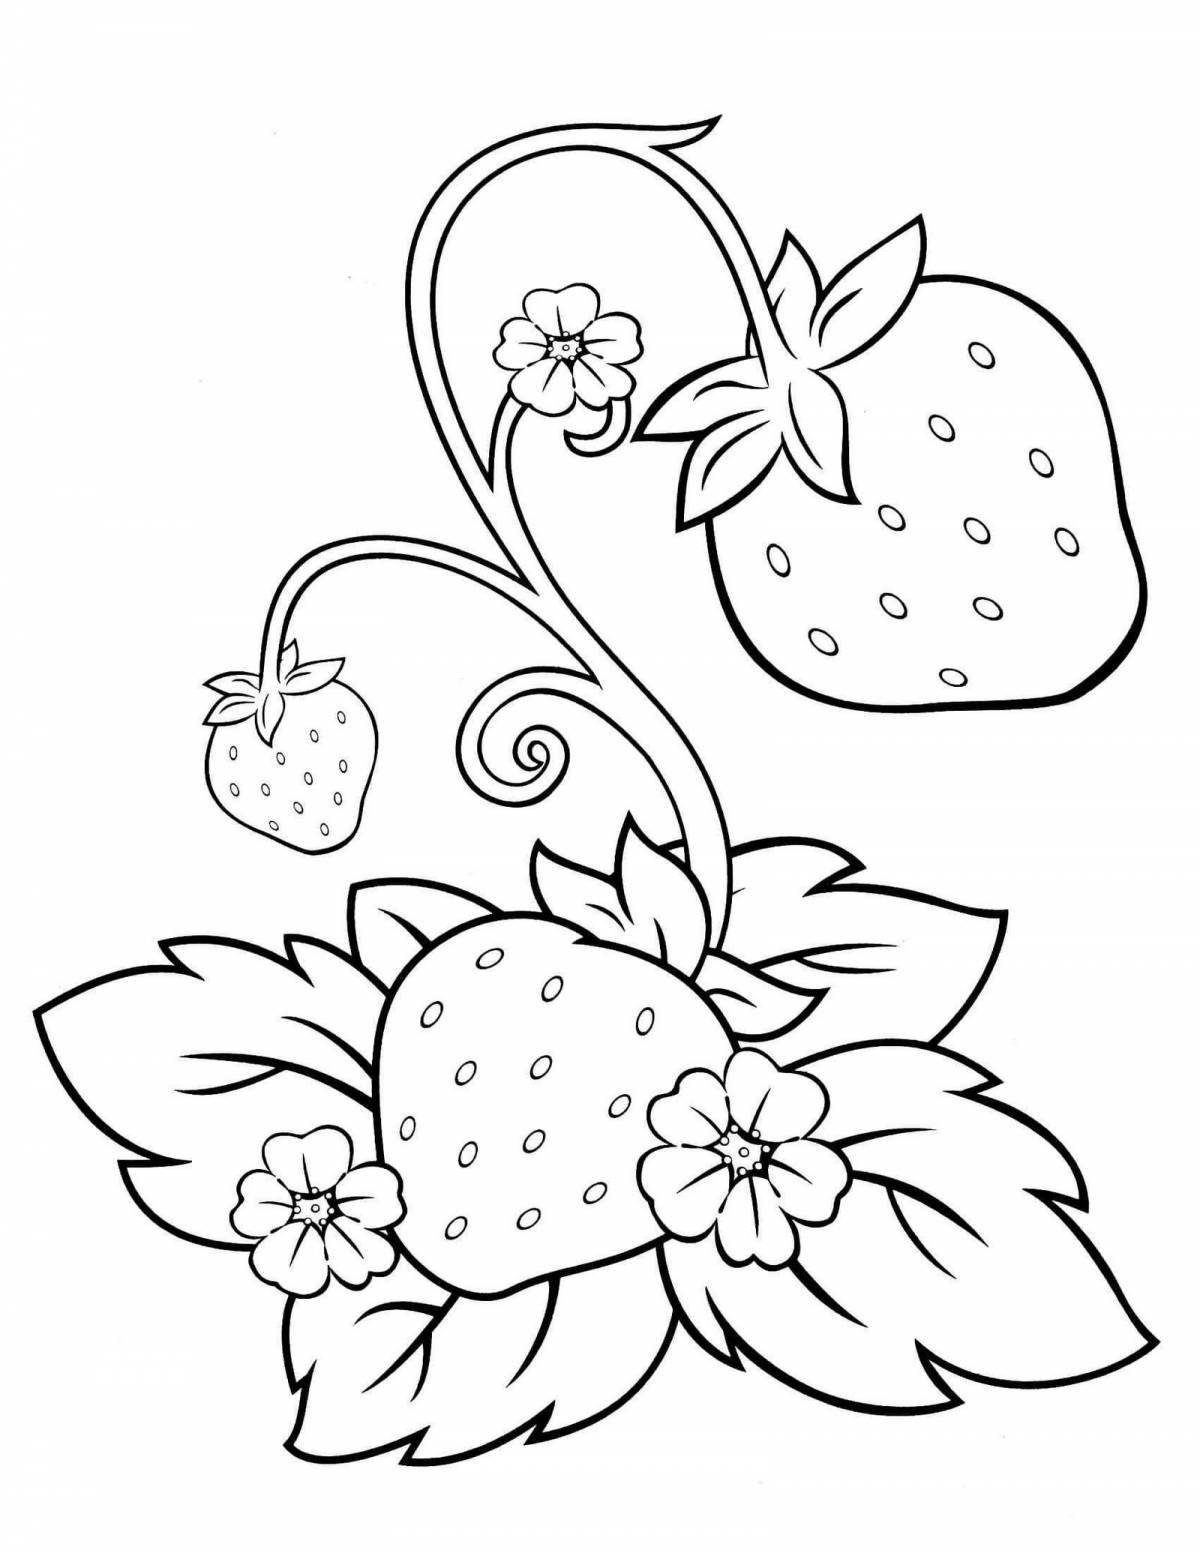 Charming strawberry coloring book for kids 5-6 years old